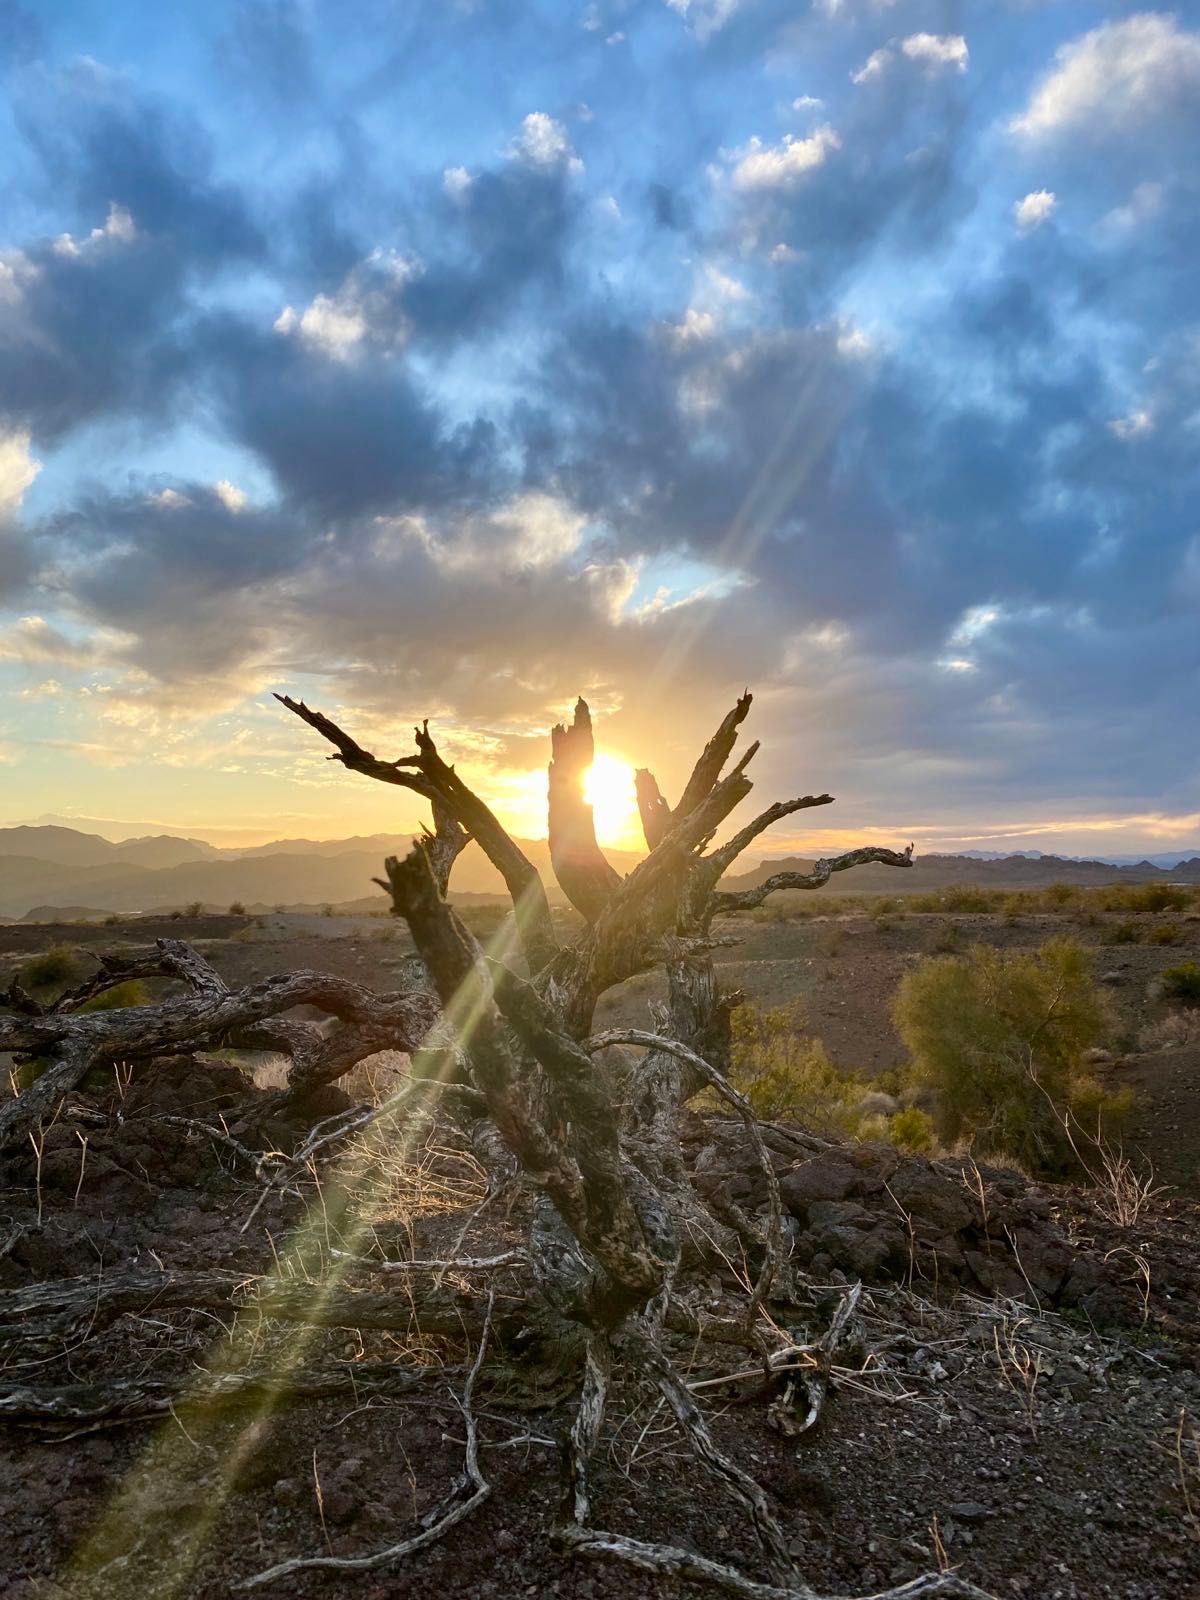 after a cold and windy day i get some desert love in the sonoran desert of arizona